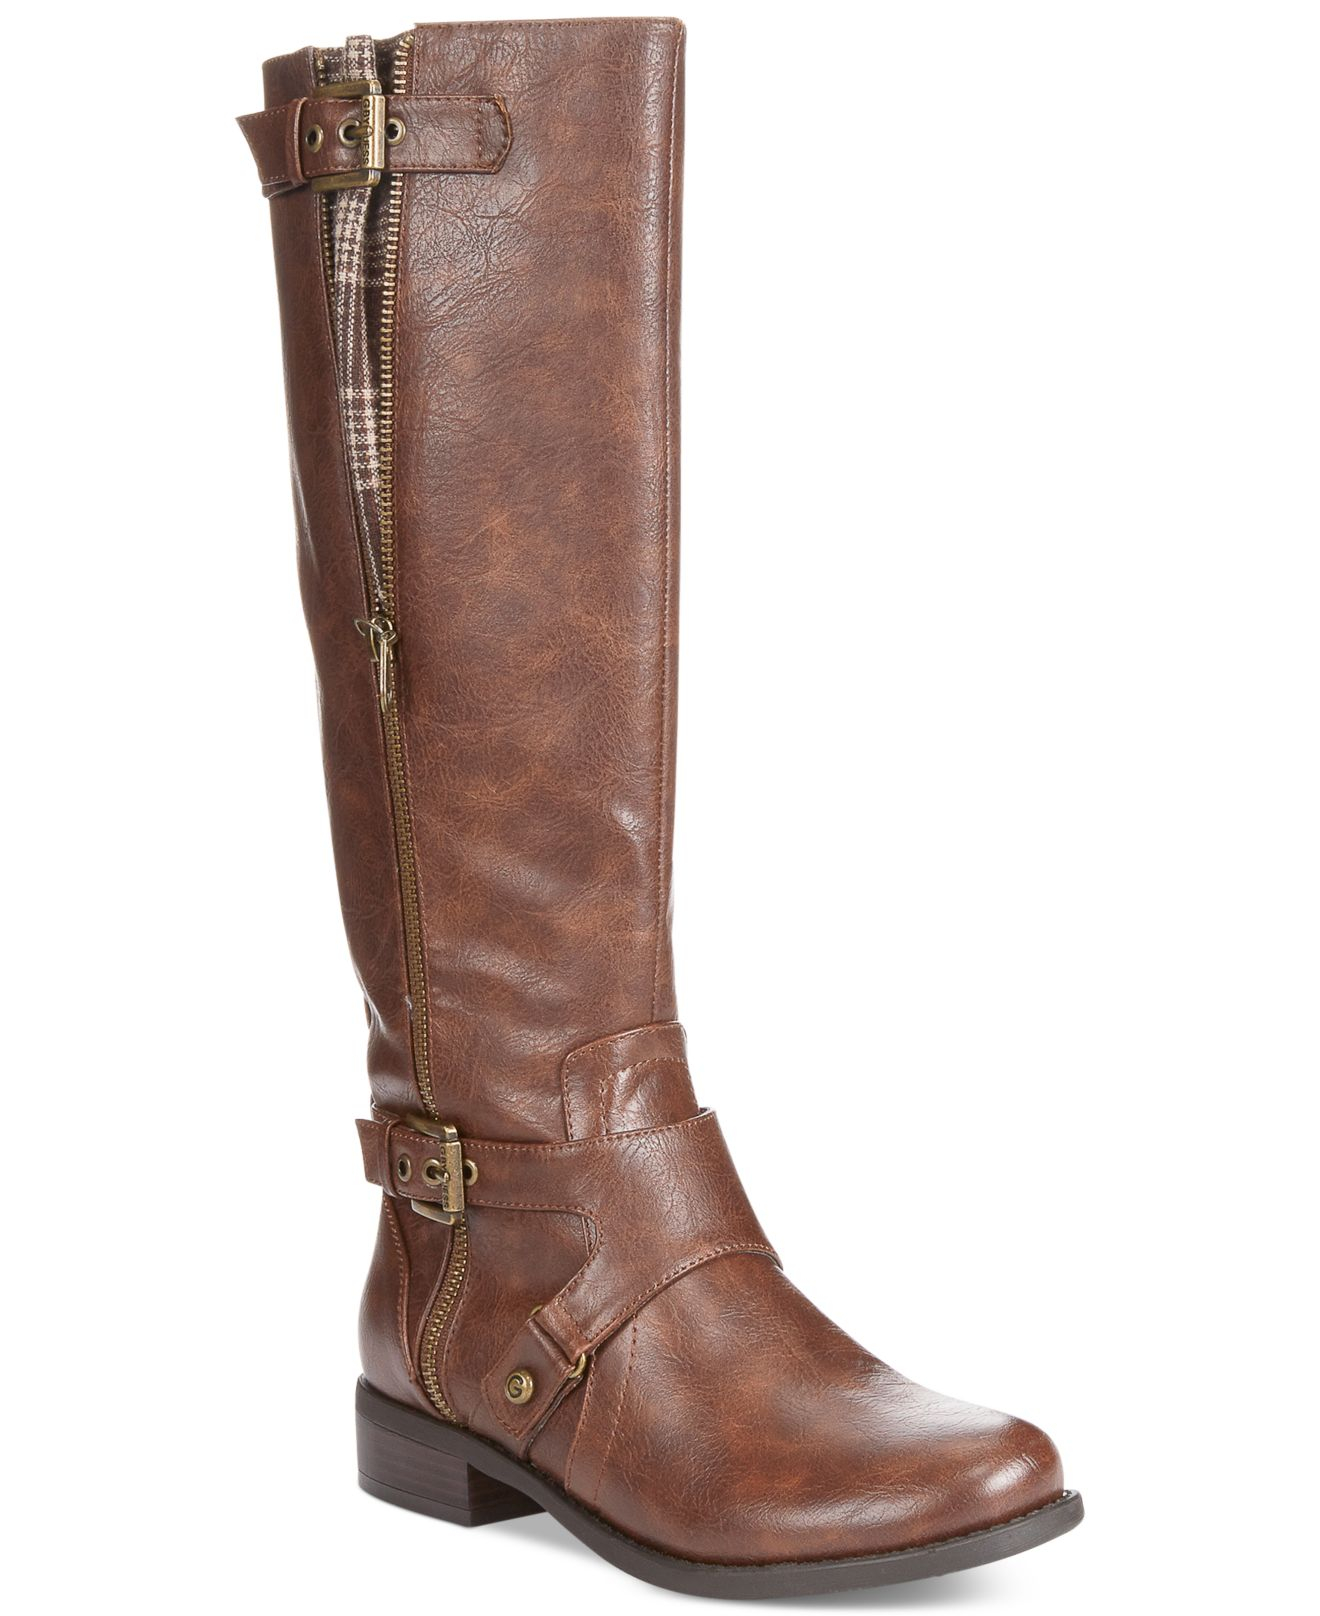 Lyst - G By Guess Women'S Hertle Tall Shaft Riding Boots in Brown